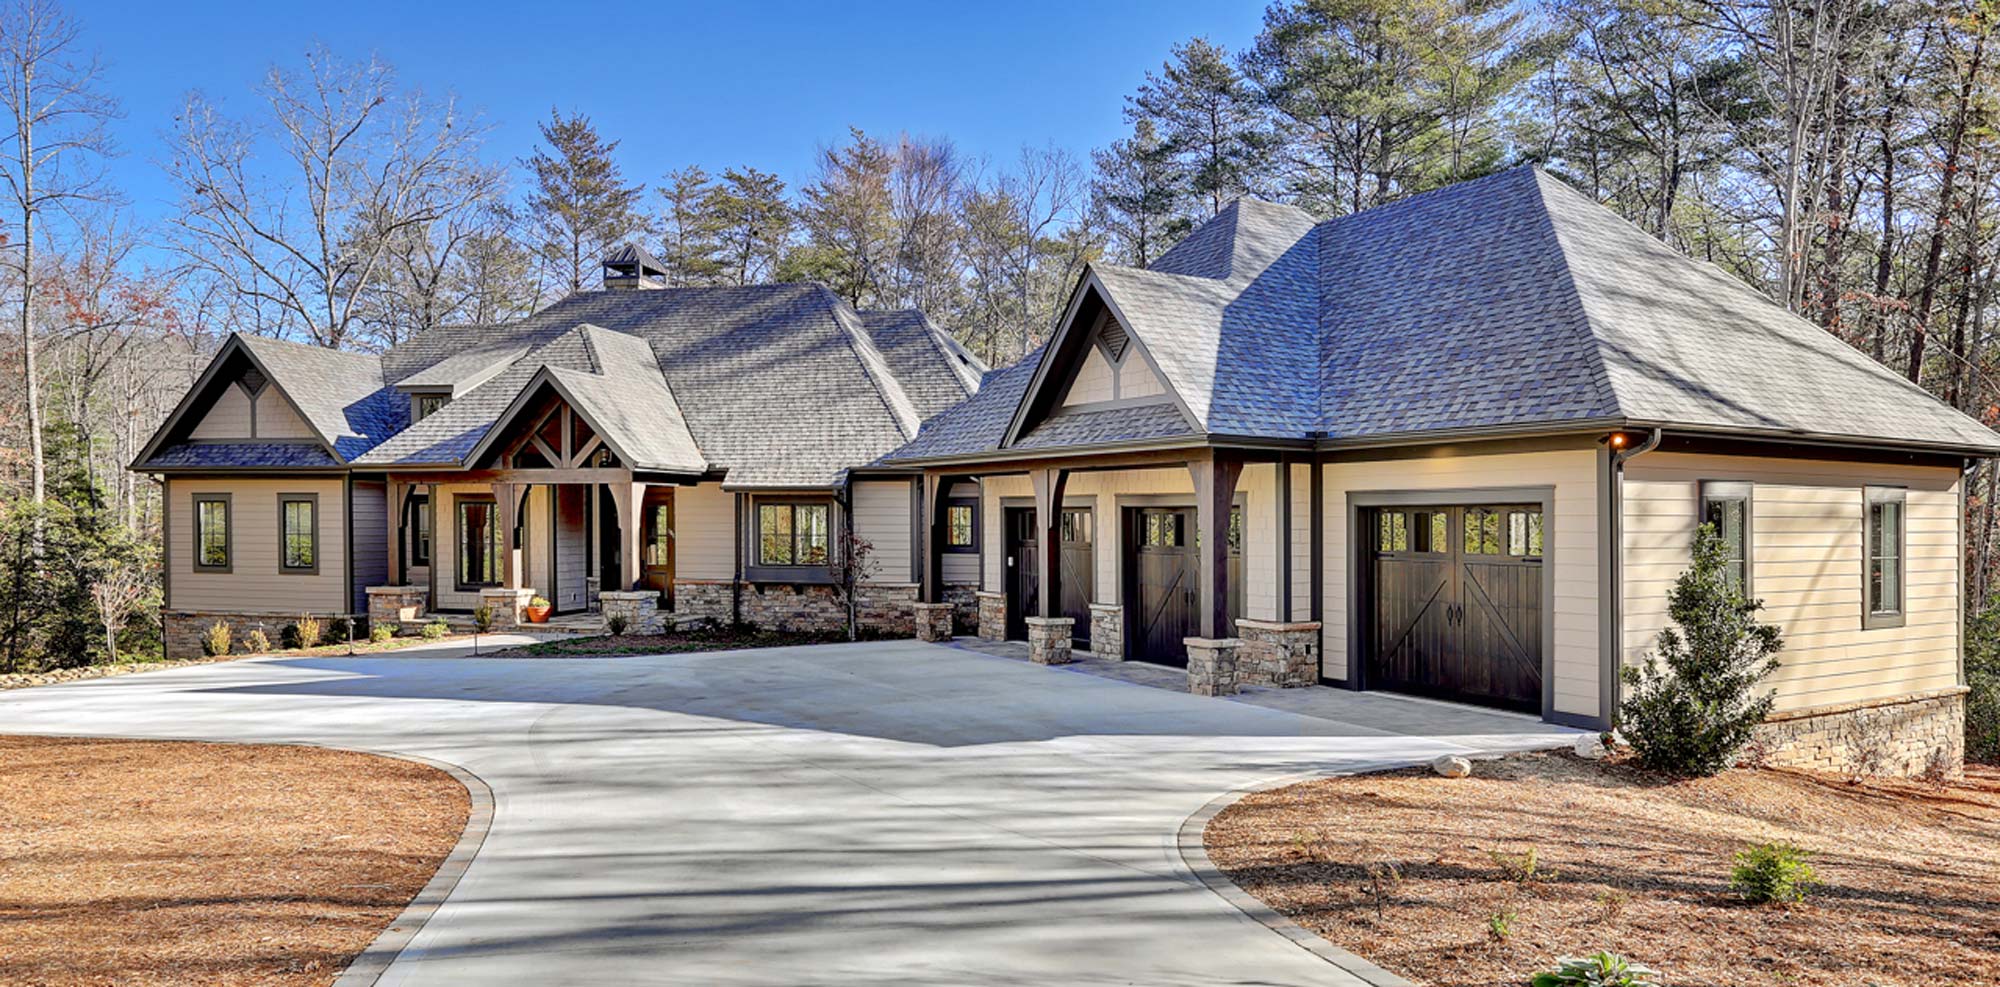 Design Elite architectural innovation in Upstate South Carolina our work mountain residential image house 2 - Mountain Residential